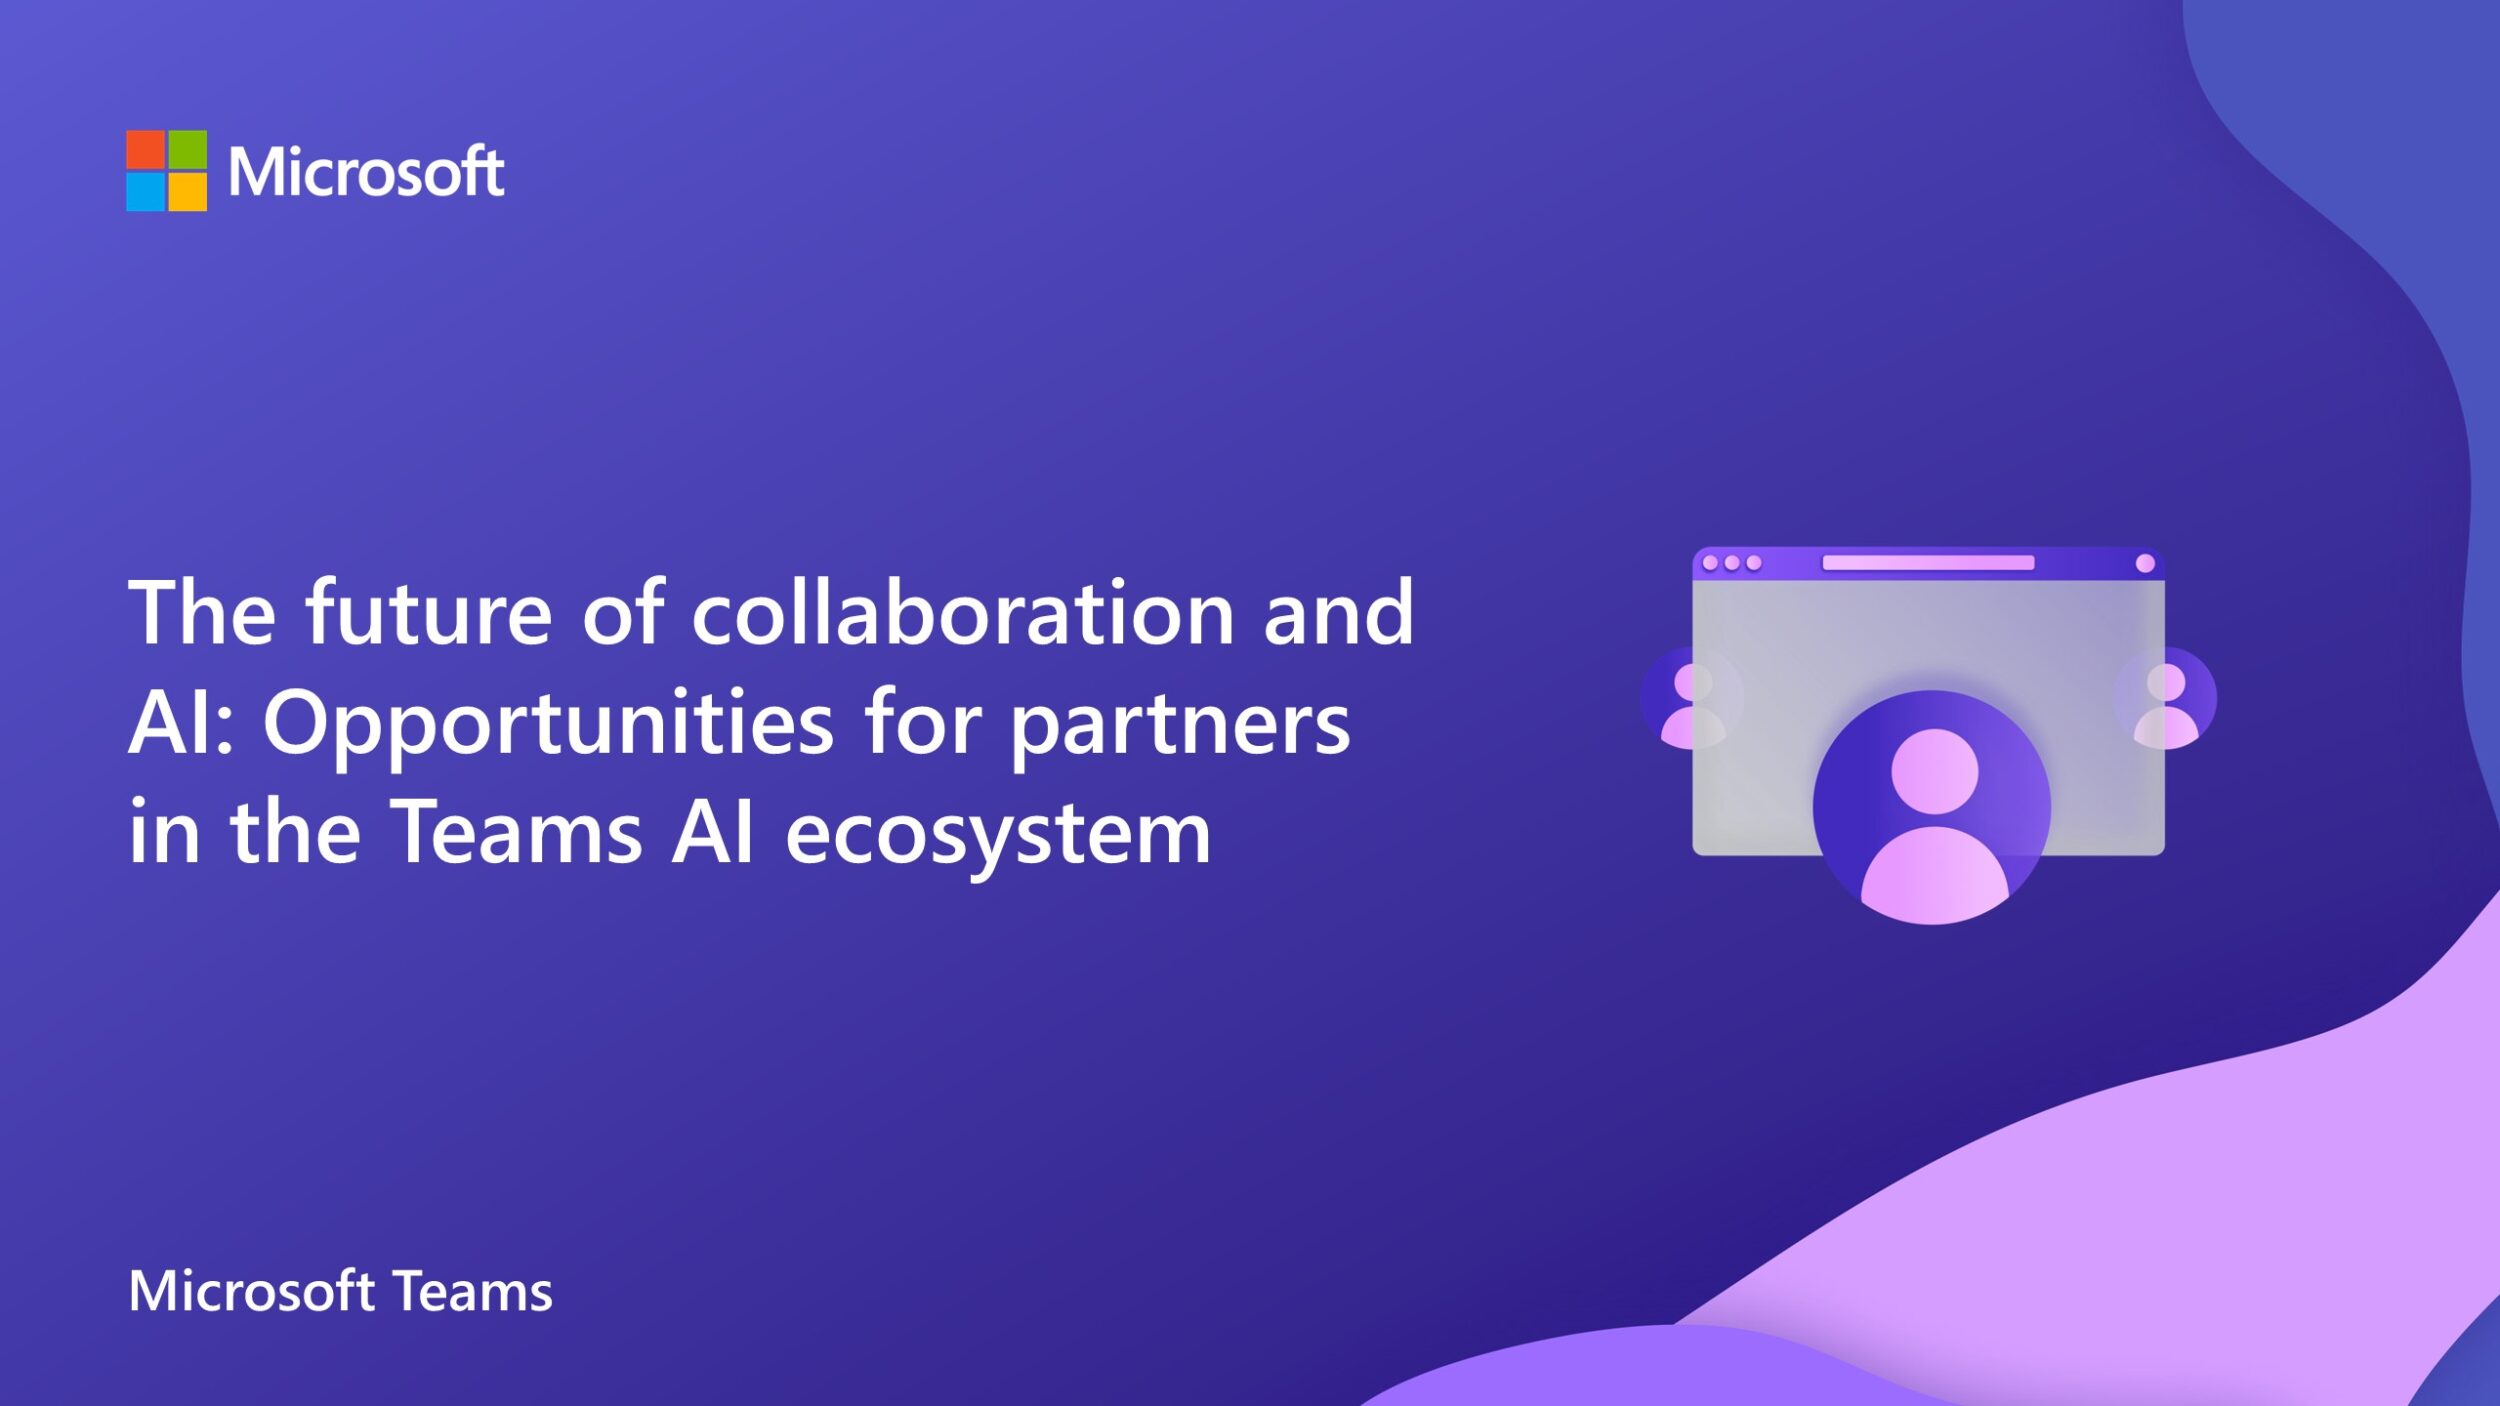 The future of collaboration and AI: Opportunities for partners in the Microsoft Teams AI ecosystem